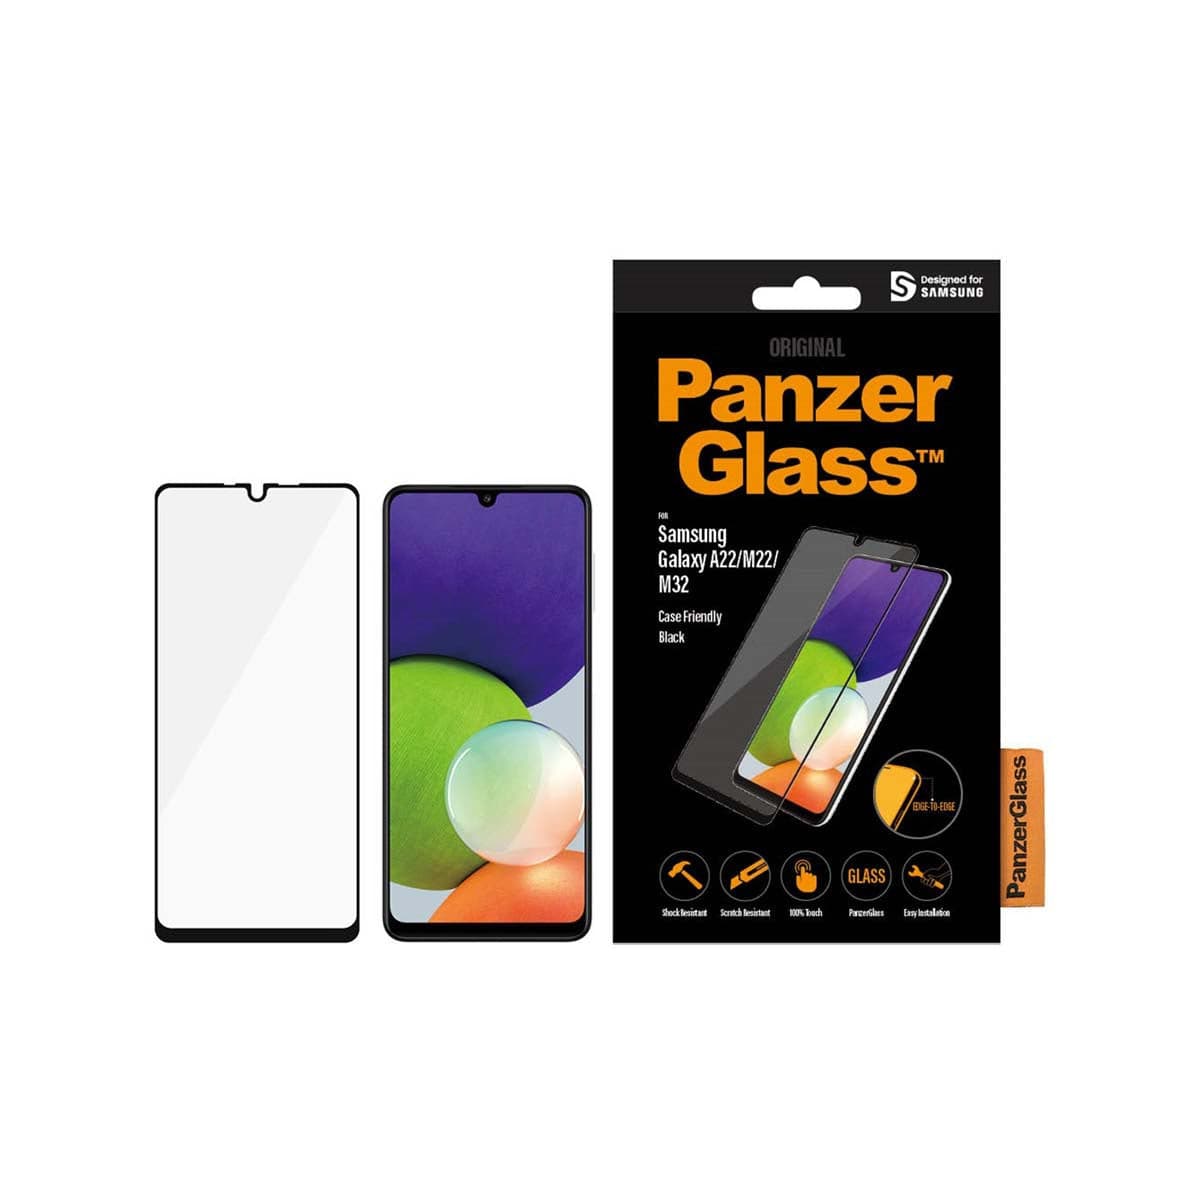 PanzerGlass Phone Screen Protector for Samsung A22 4G - Clear.